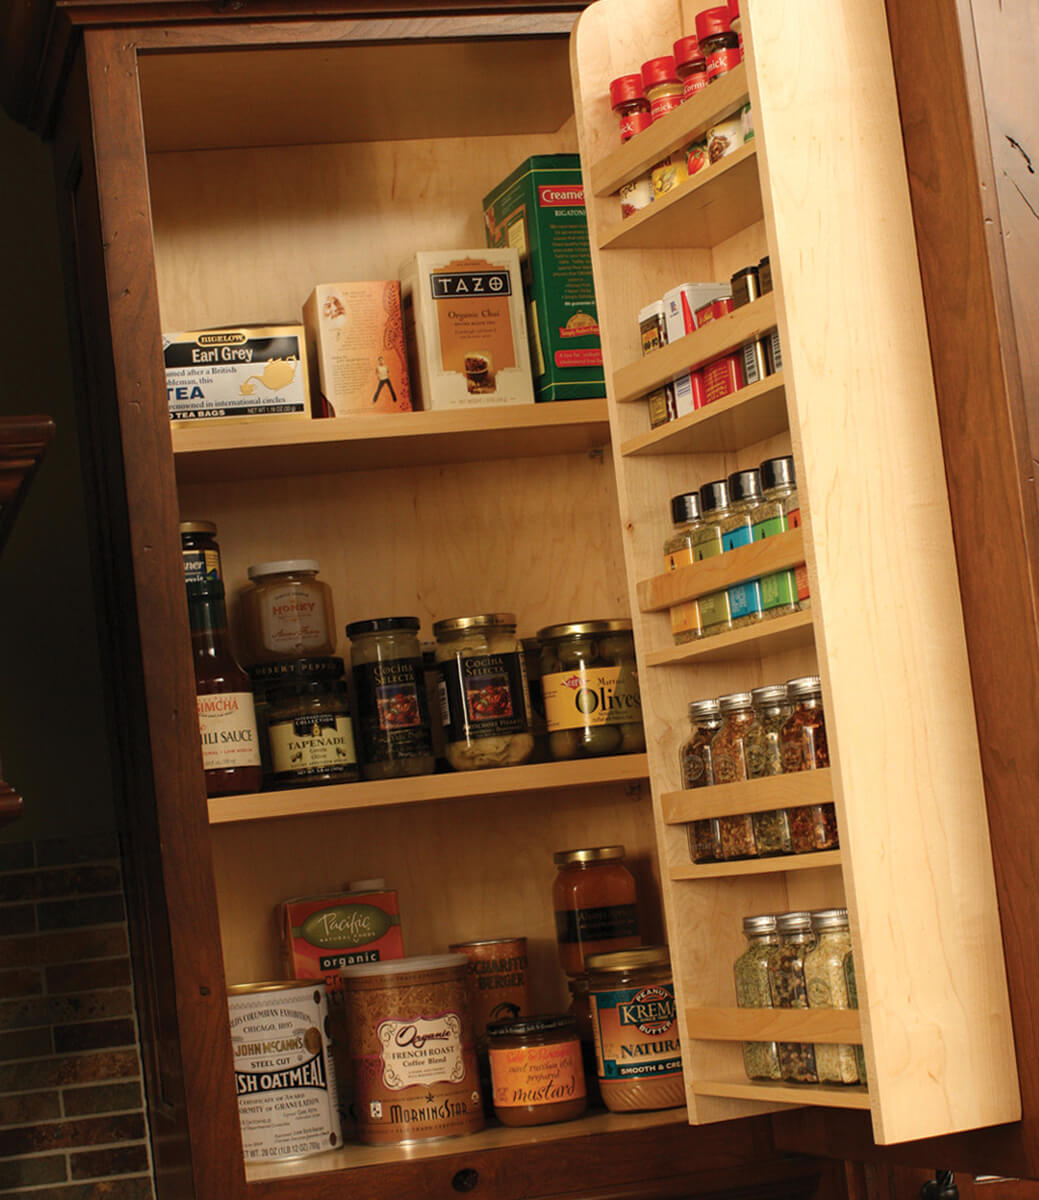 A traditional wall cabinet door spice rack from Dura Supreme Cabinetry stores row after row of spices.